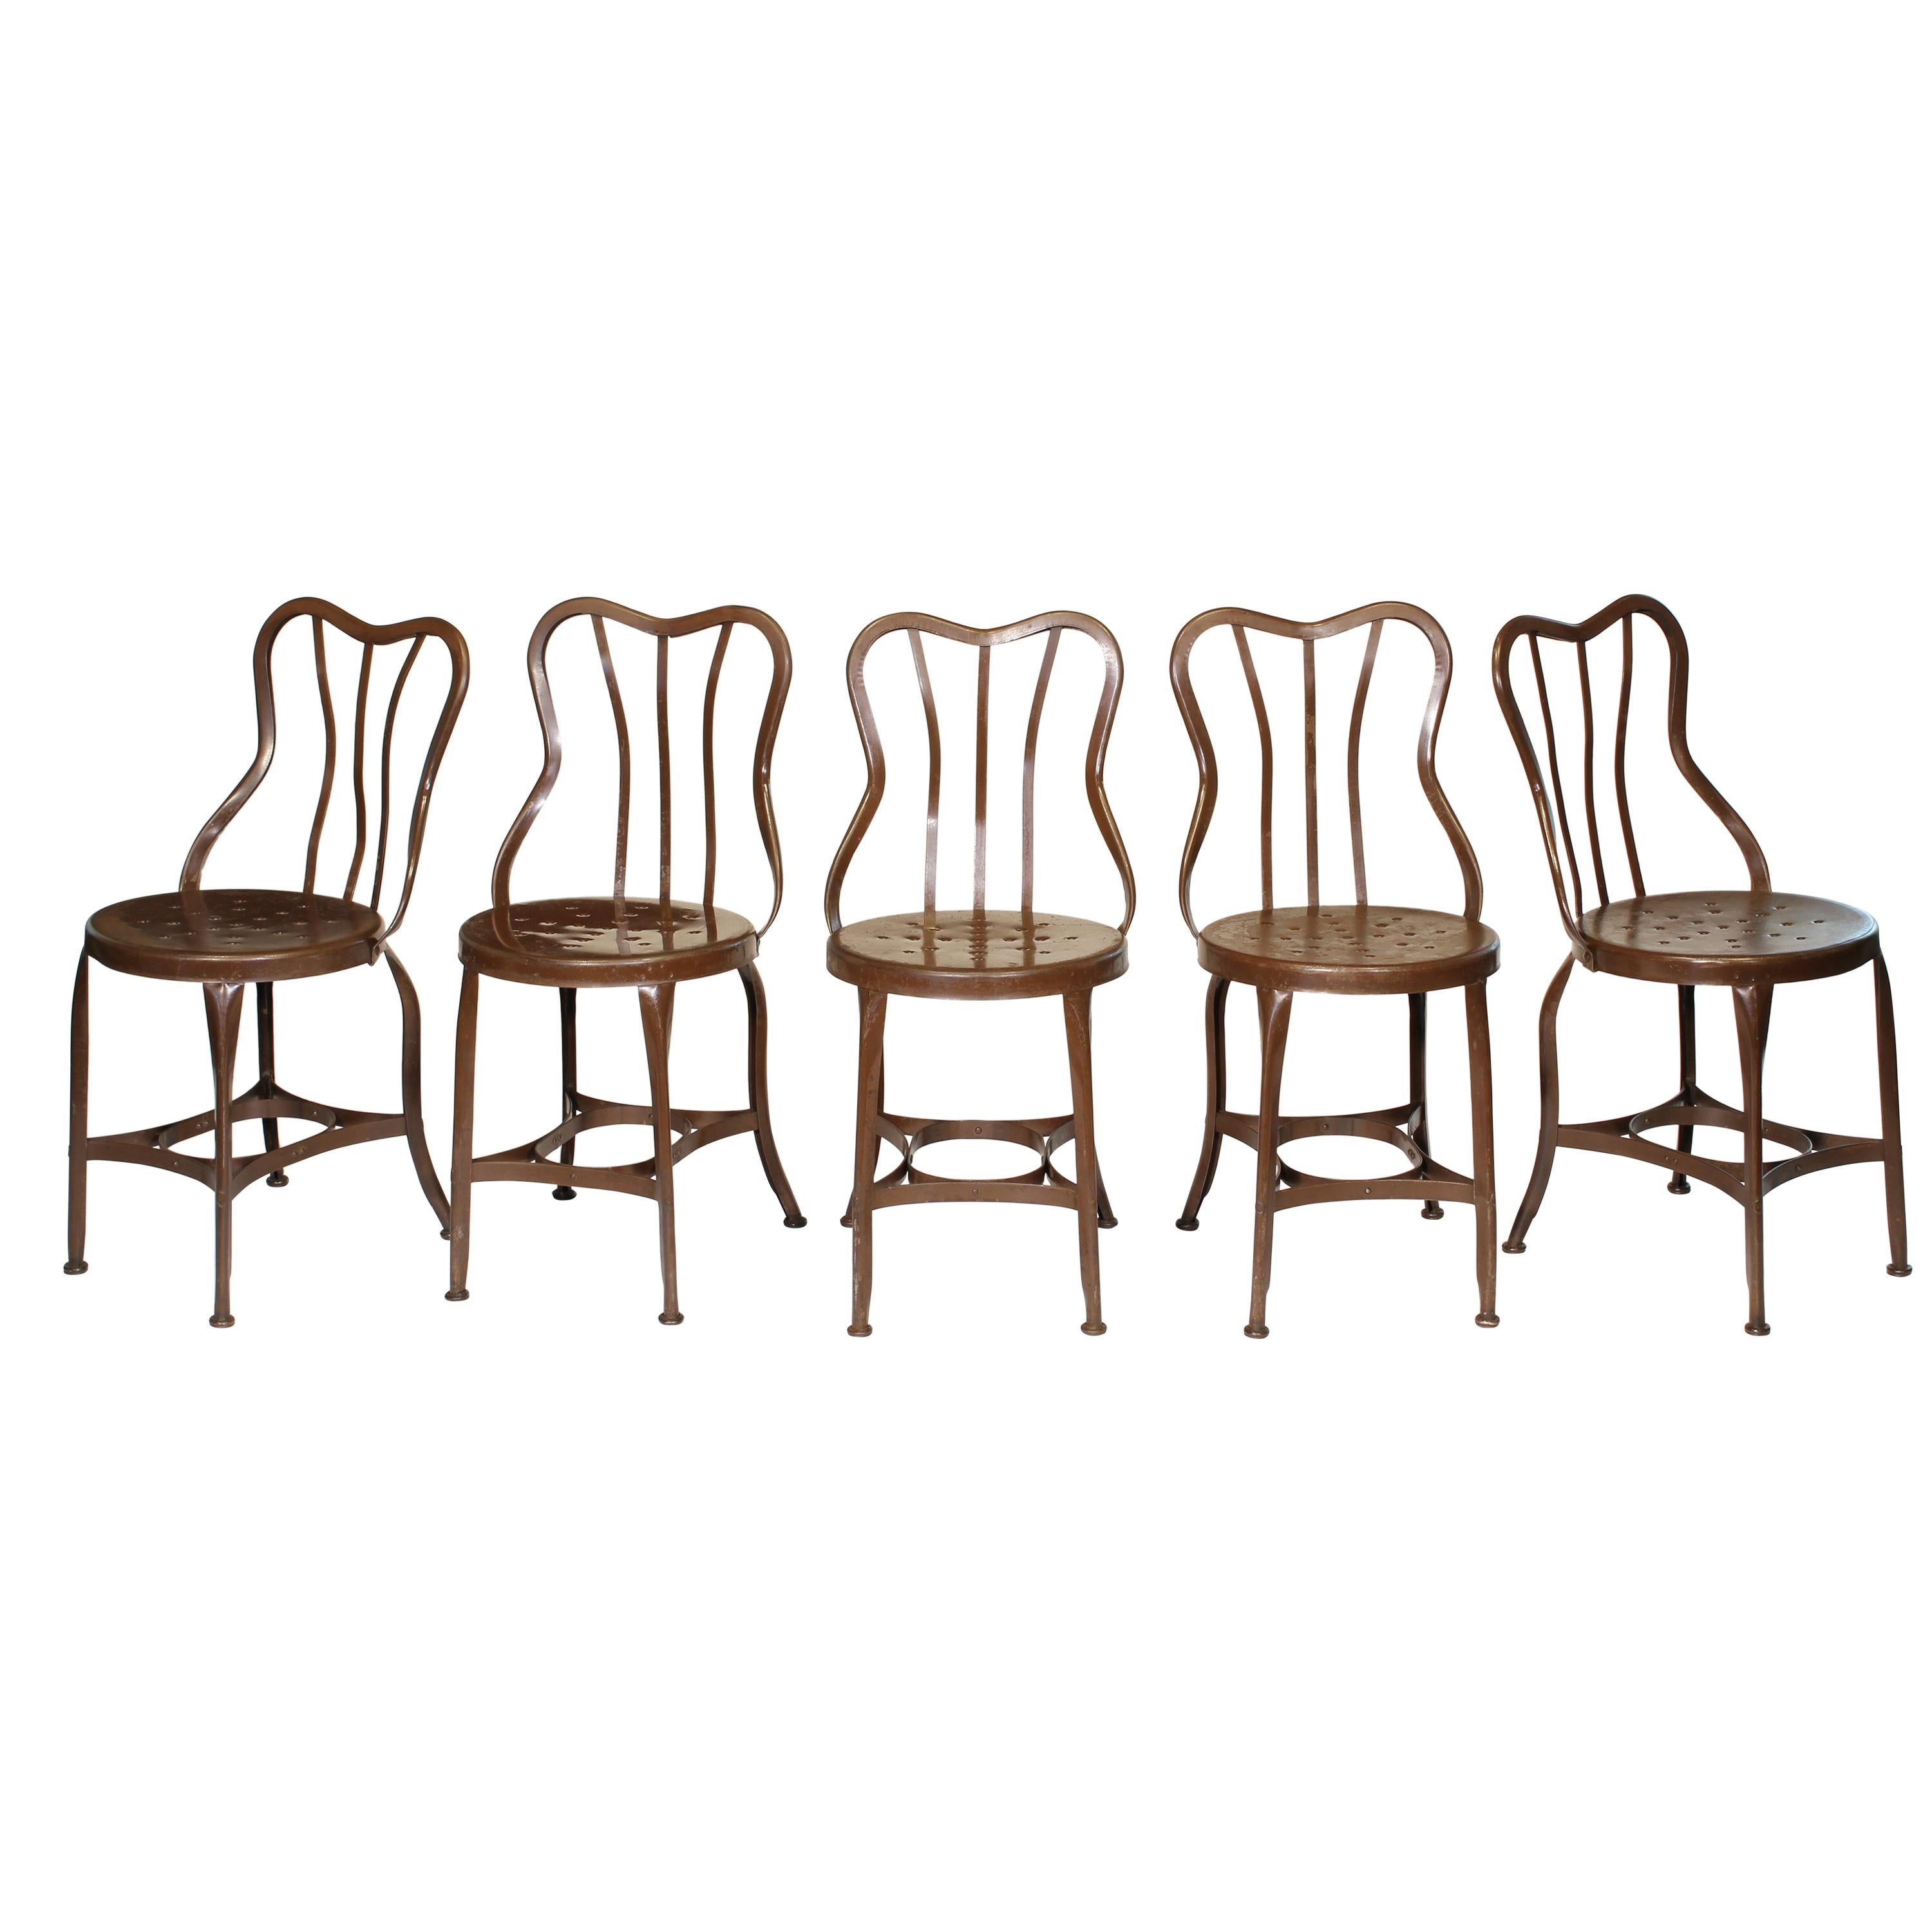 Set of 5 Antique Metal Cafe Chairs by Toledo